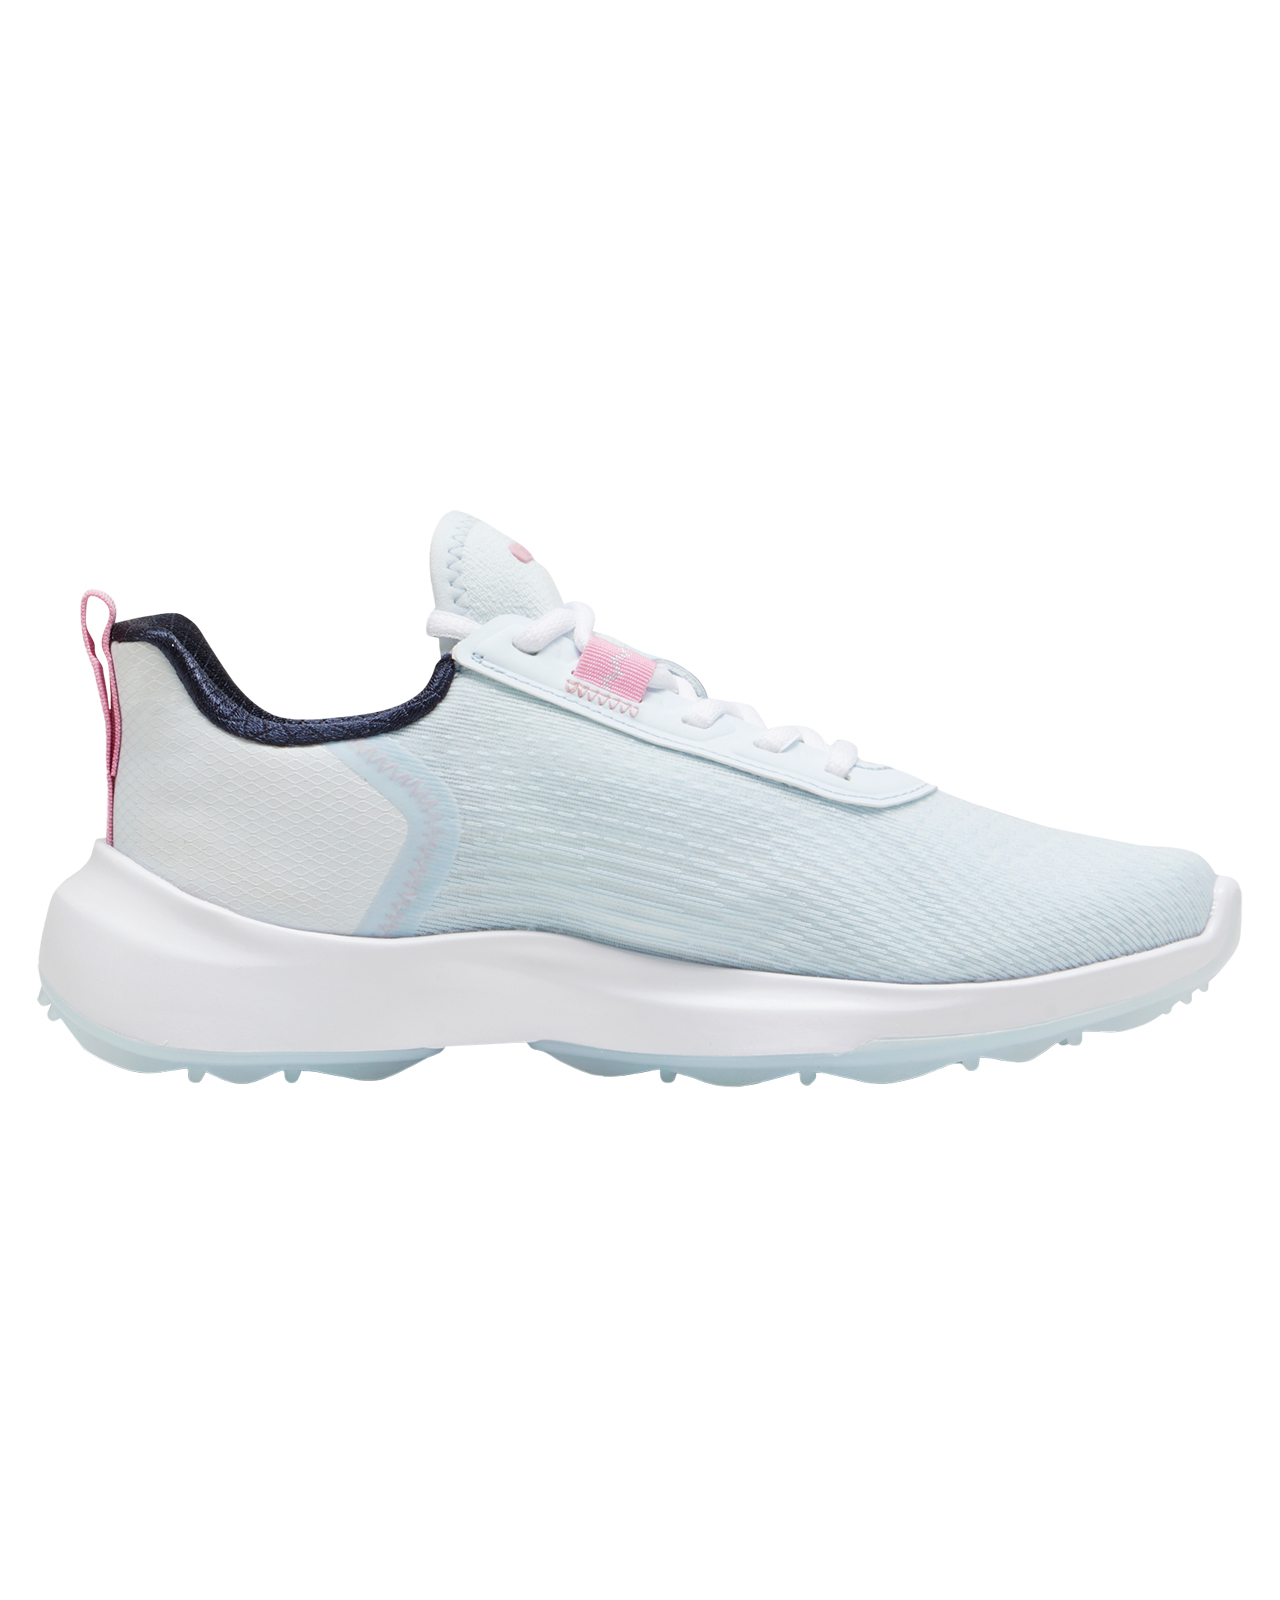 Fusion Crush Sport, Damen - icy_blue_pink_icing